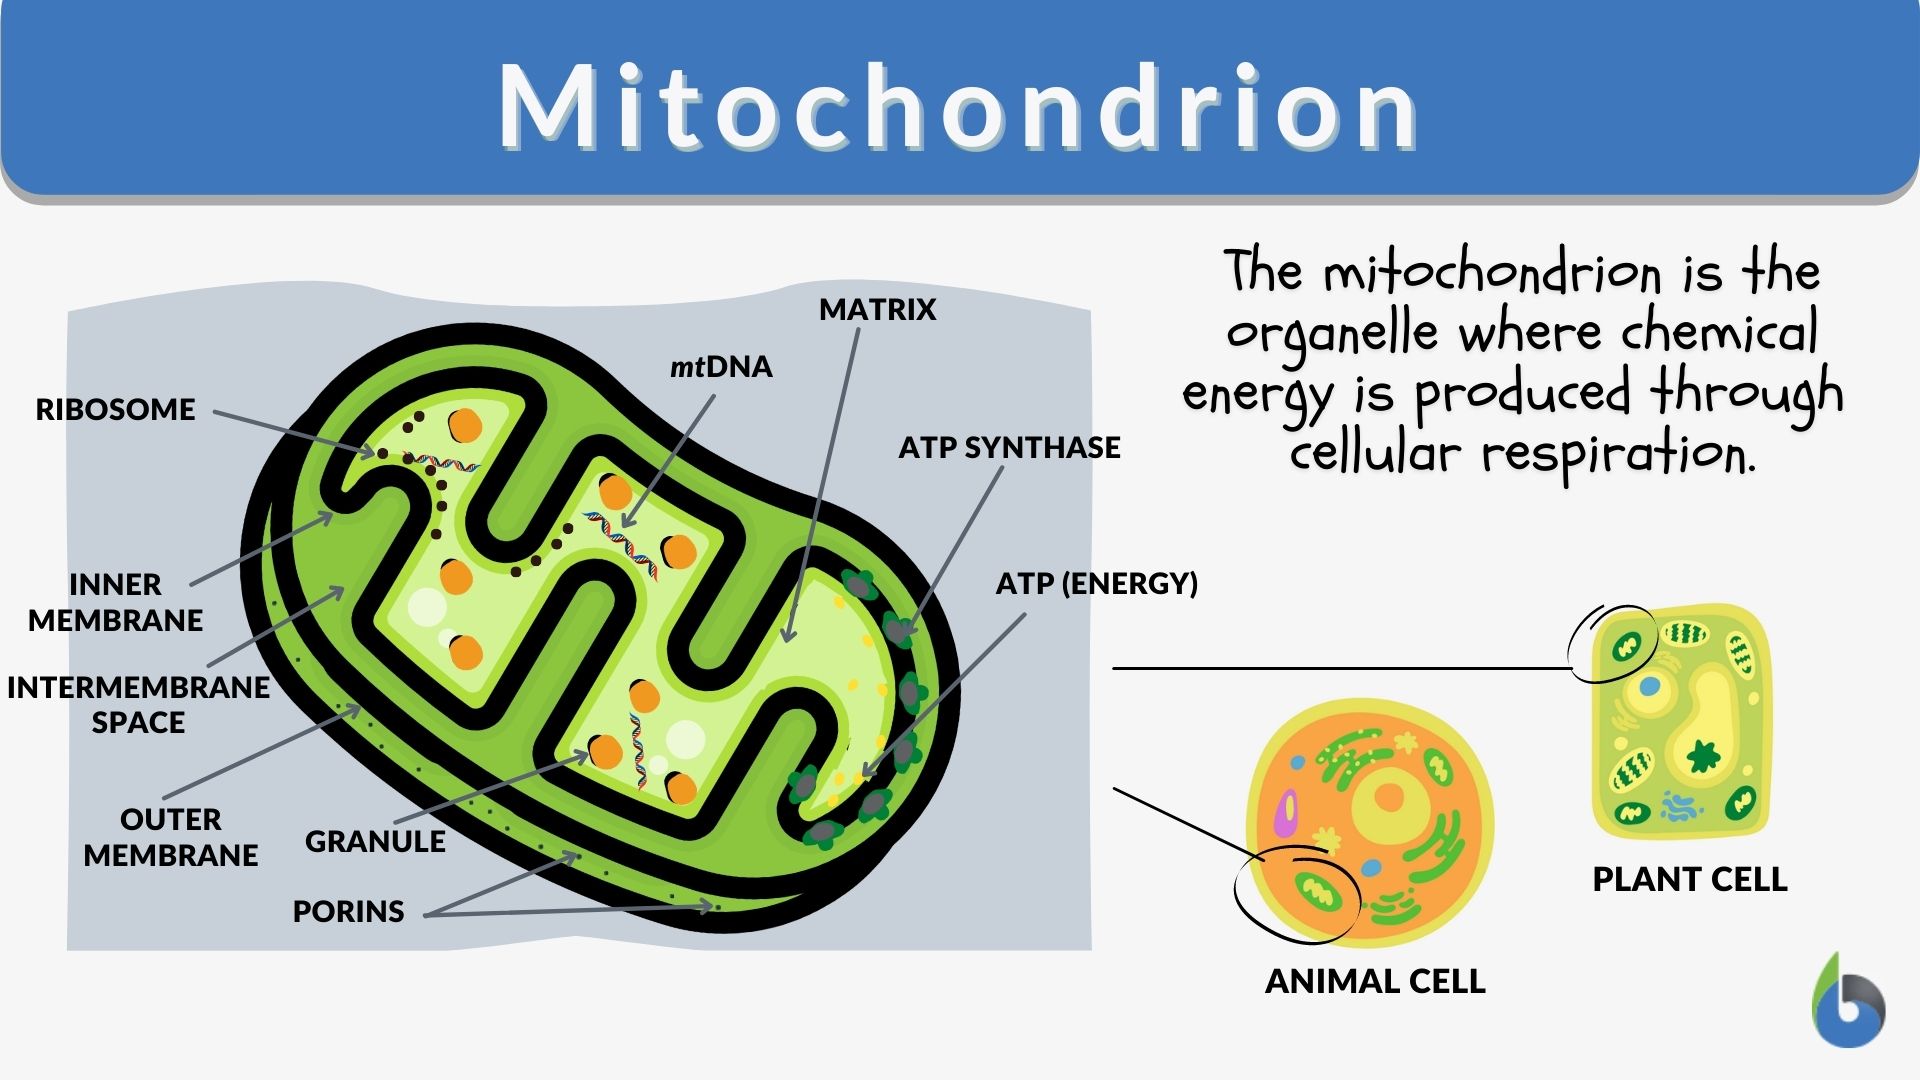 Mitochondrion - Definition and Examples - Biology Online Dictionary